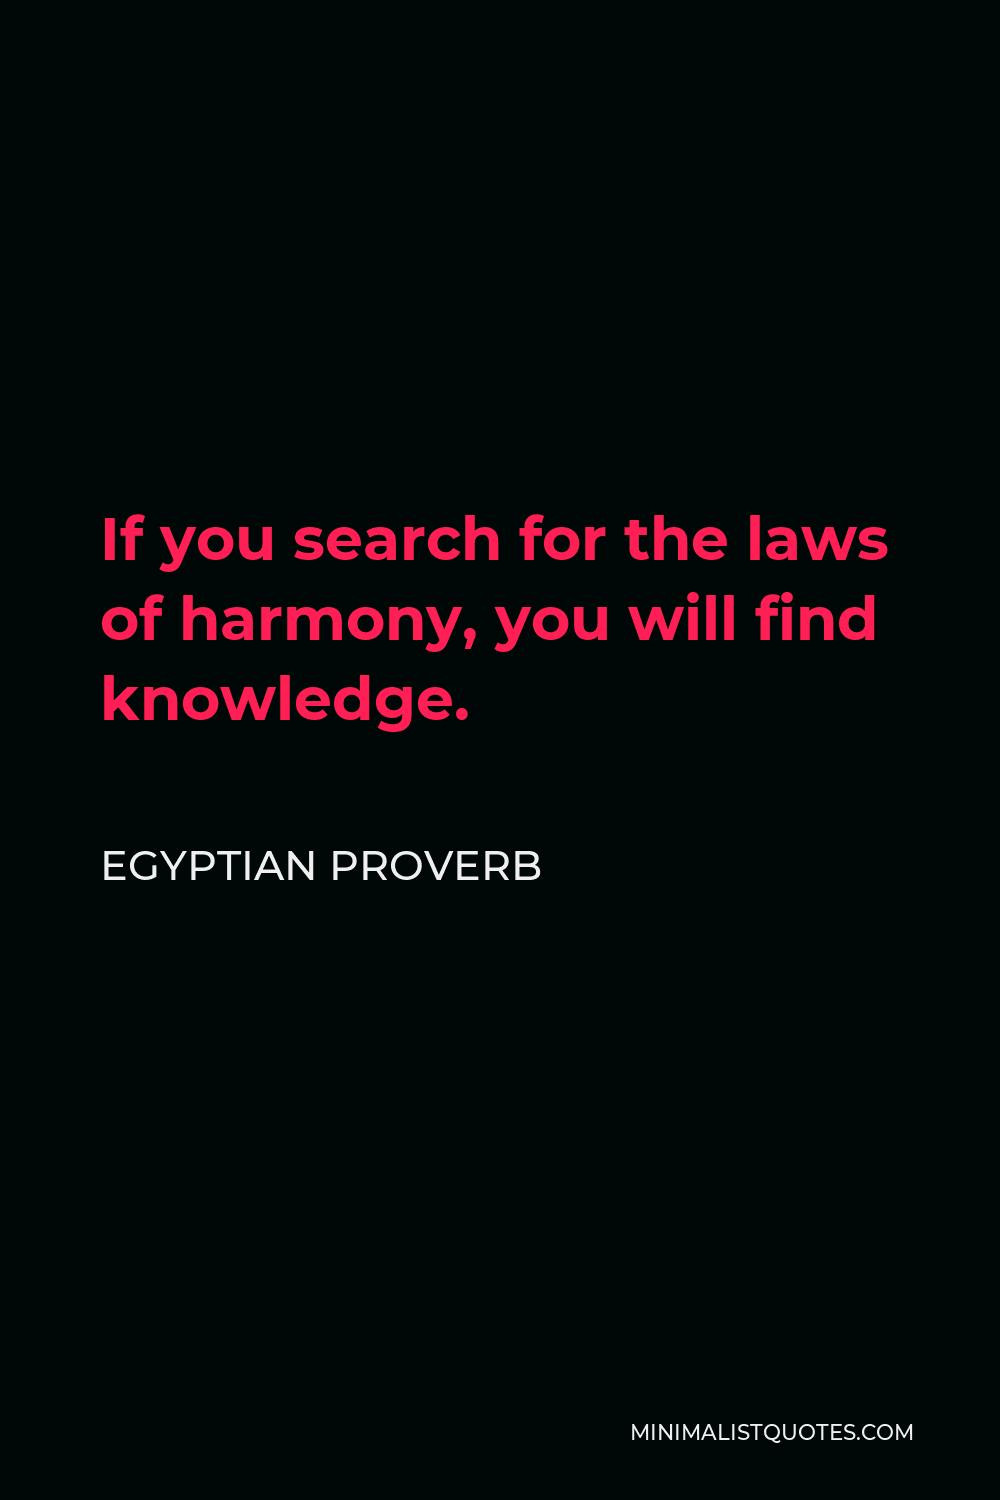 Egyptian Proverb Quote - If you search for the laws of harmony, you will find knowledge.